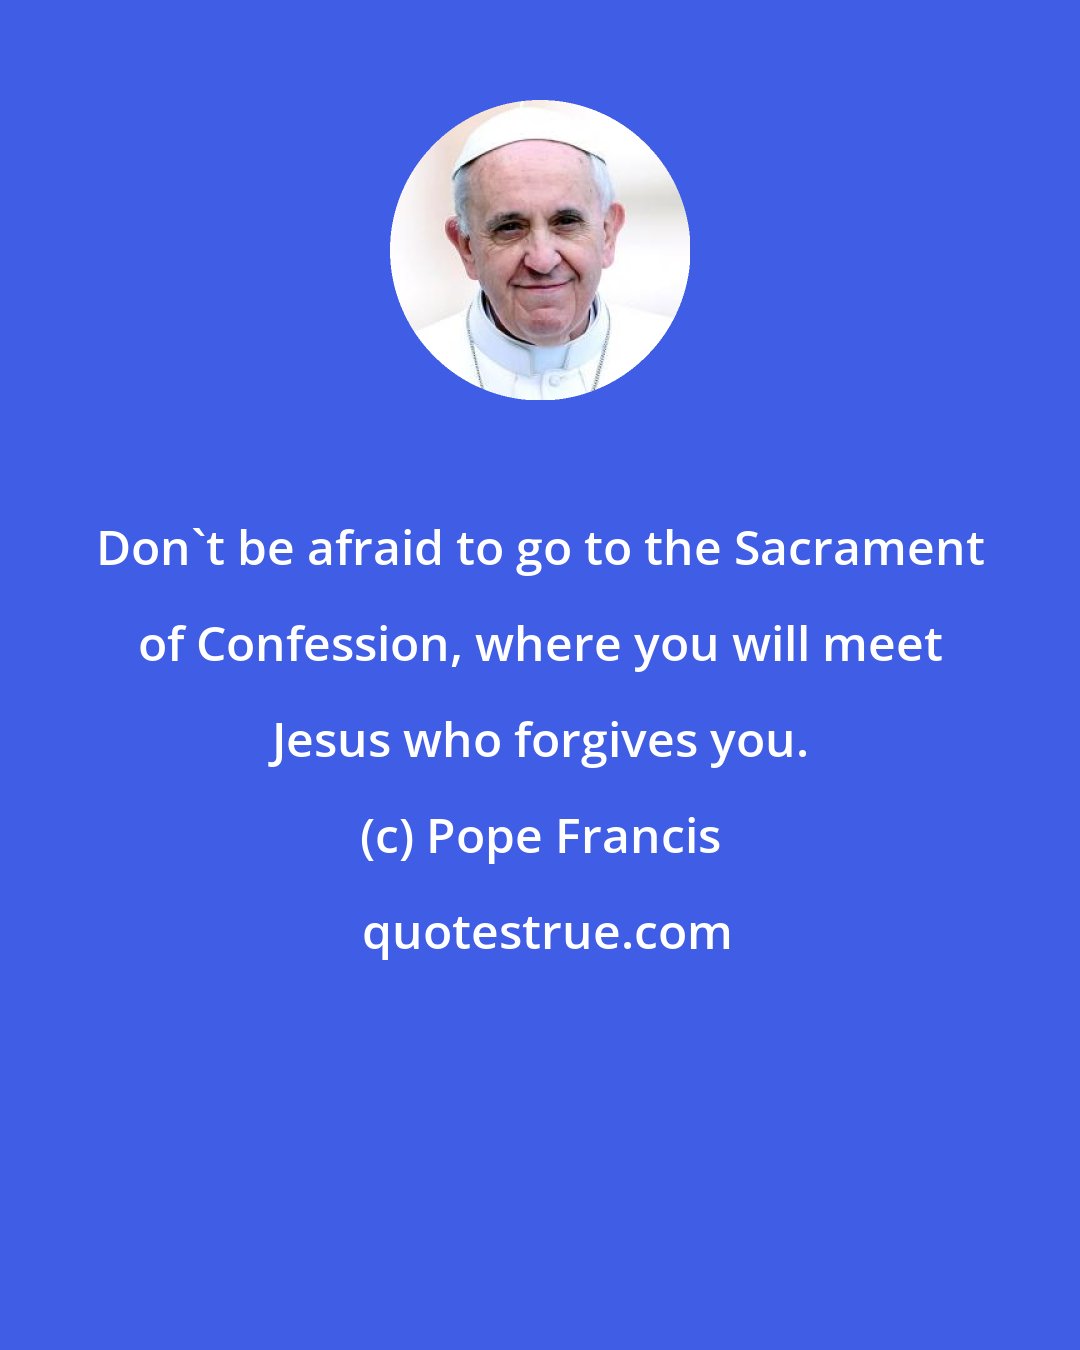 Pope Francis: Don't be afraid to go to the Sacrament of Confession, where you will meet Jesus who forgives you.